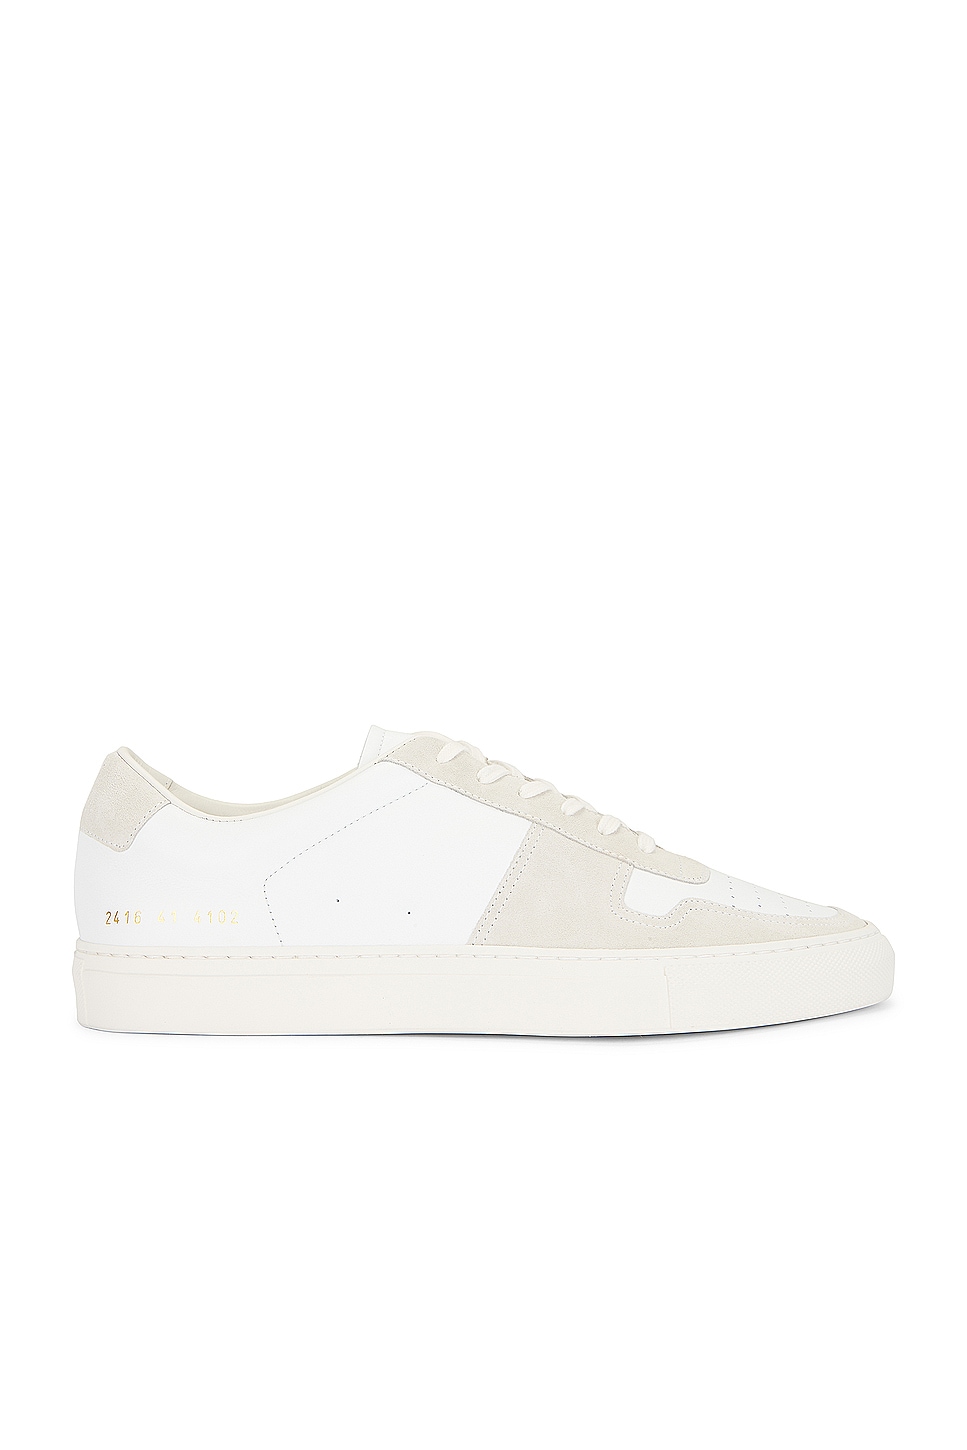 Image 1 of Common Projects Bball Duo Sneaker in White